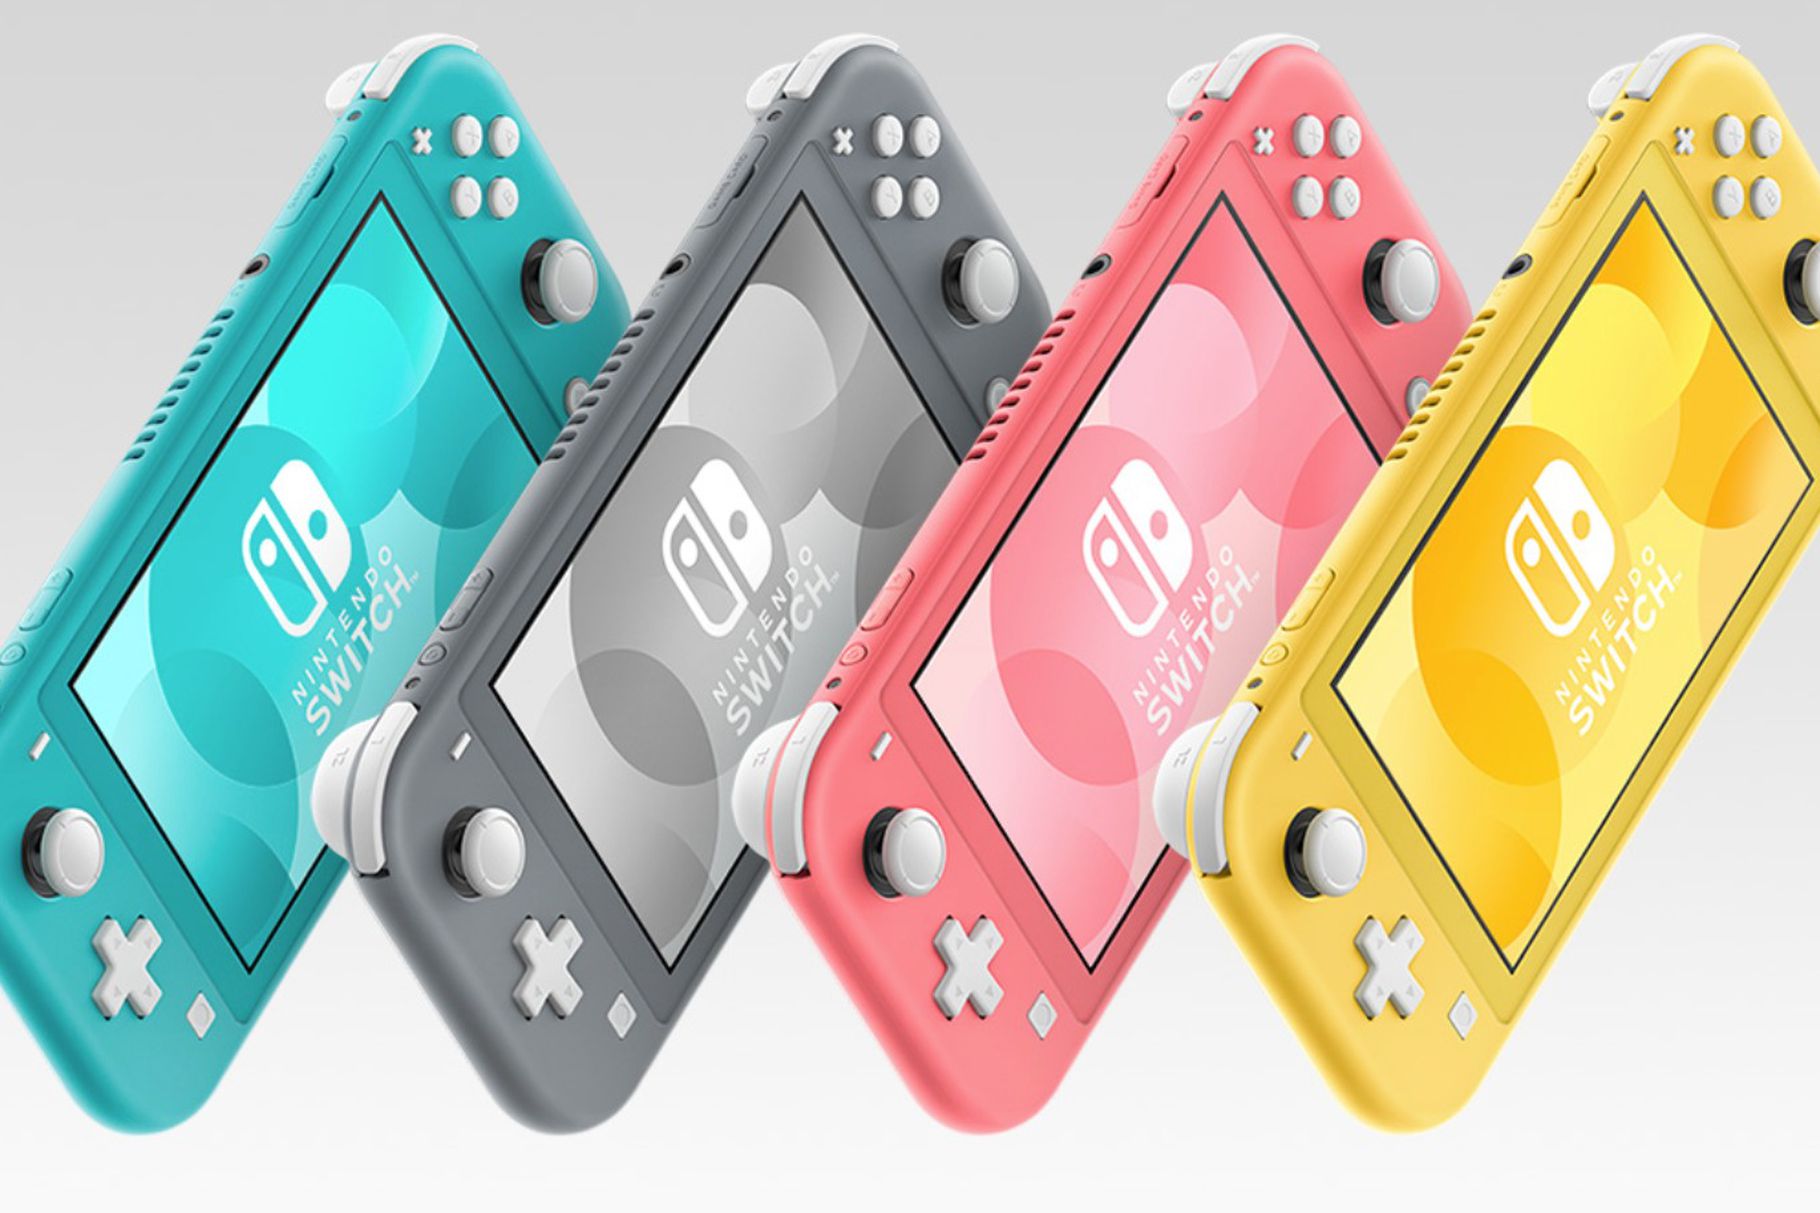 Nintendo Switch Lite Gets New Coral Color - US Release Confirmed